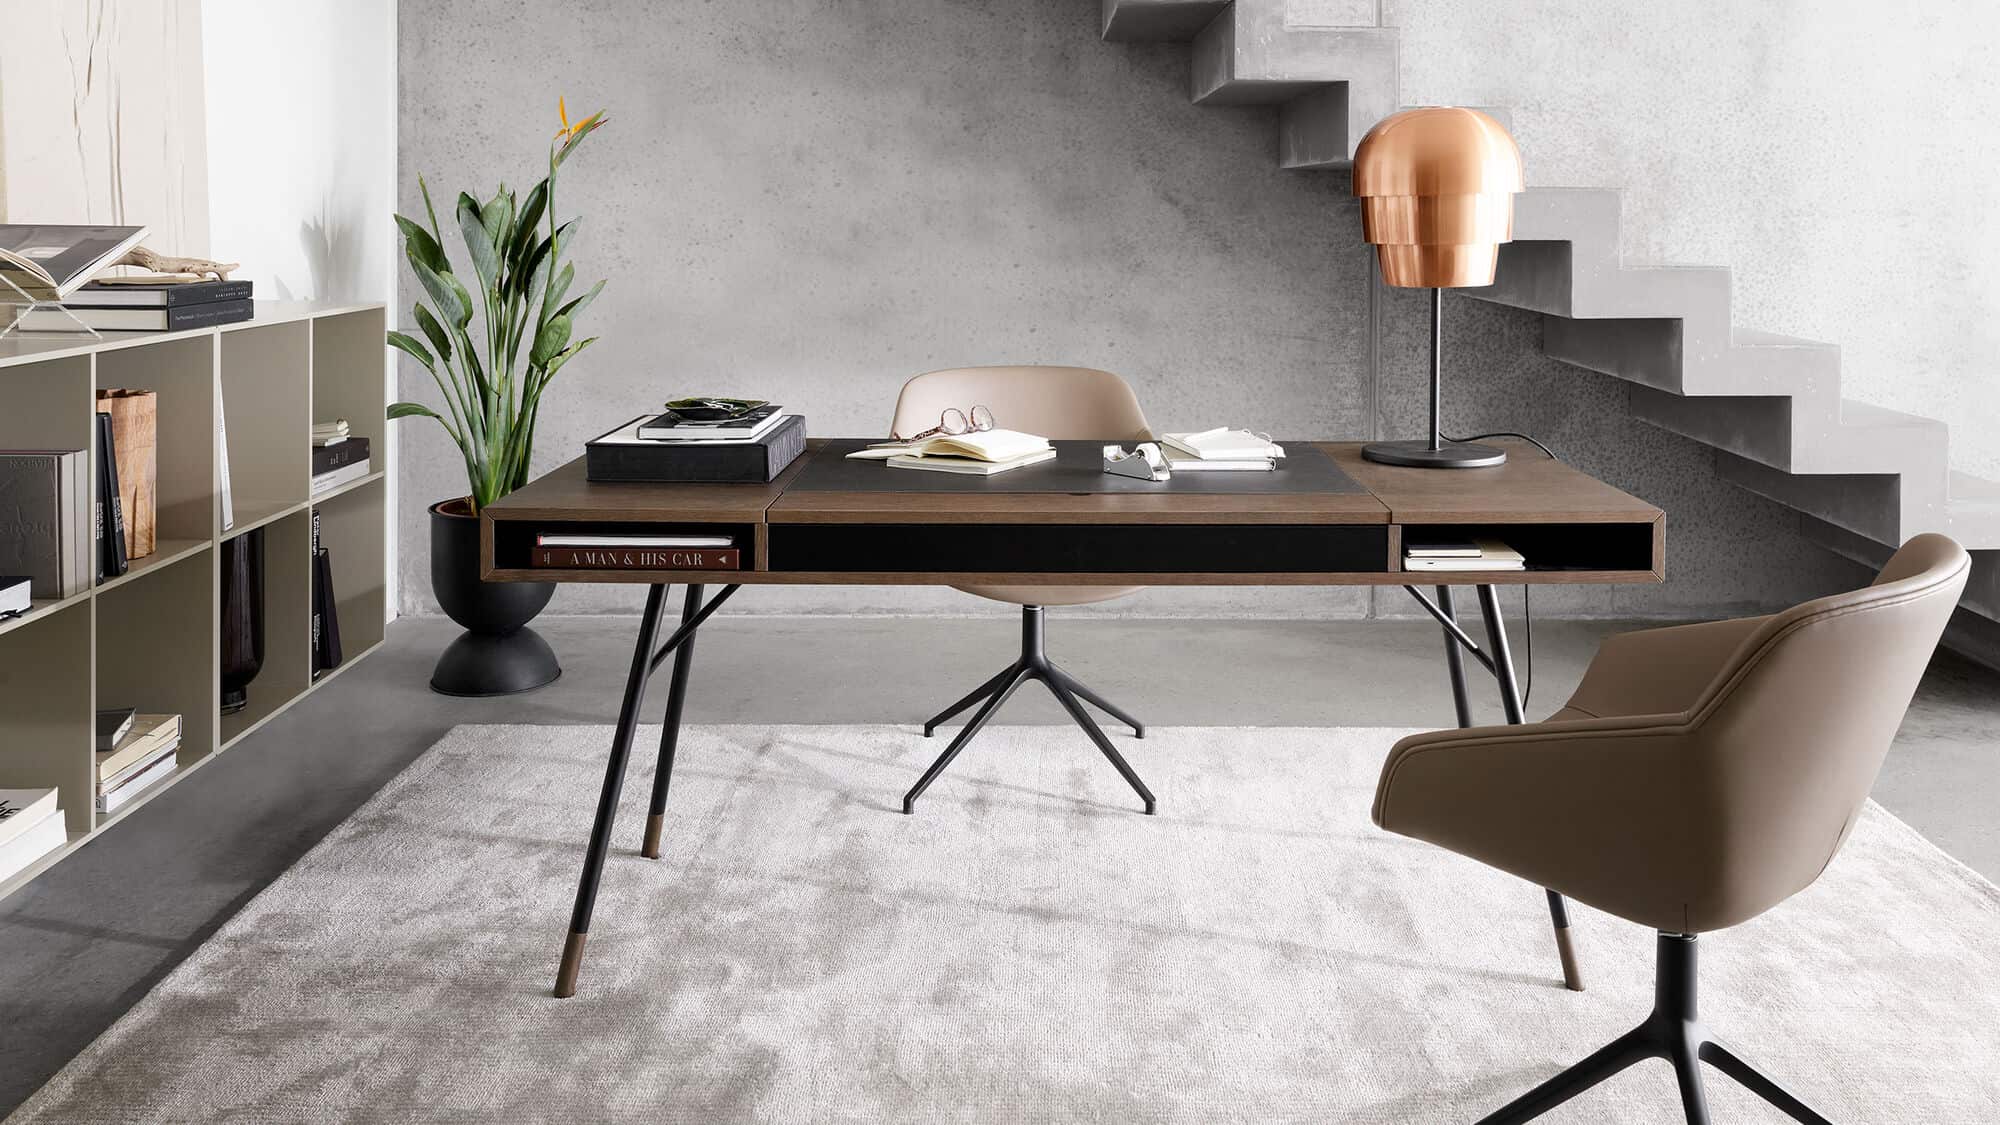 A slim table top, slender legs and a light design furniture piece, chair, plants, storage